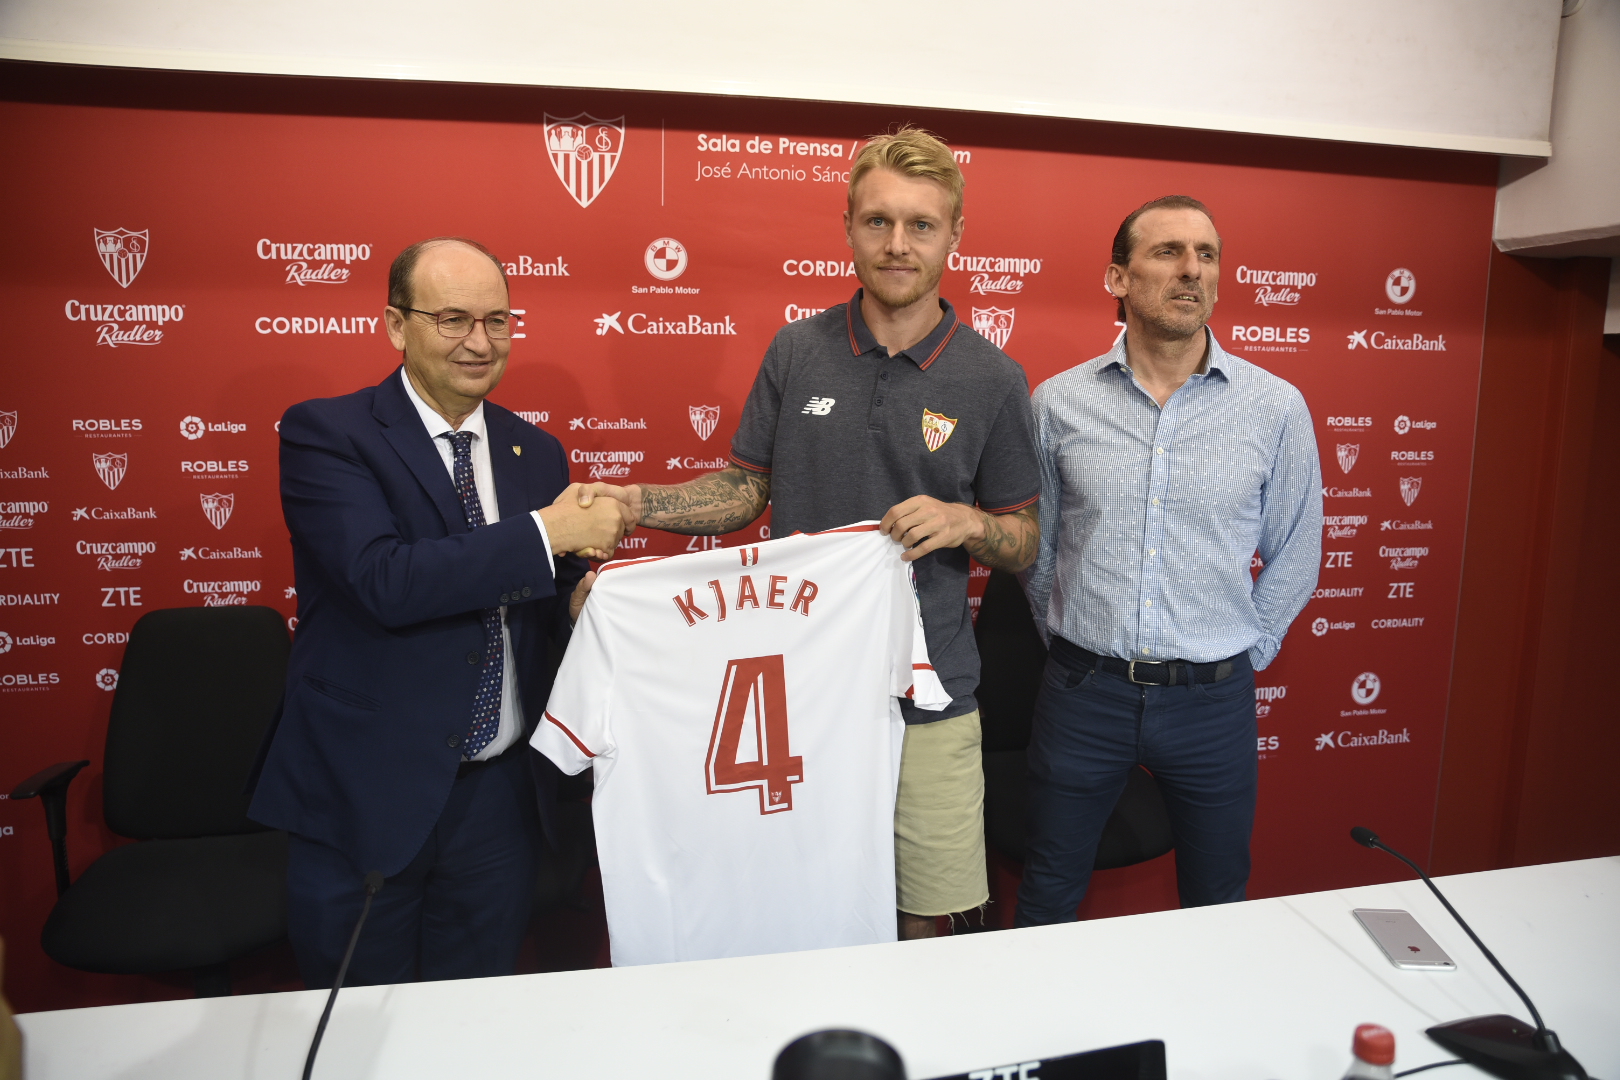 Kjaer is now a new Sevilla FC player